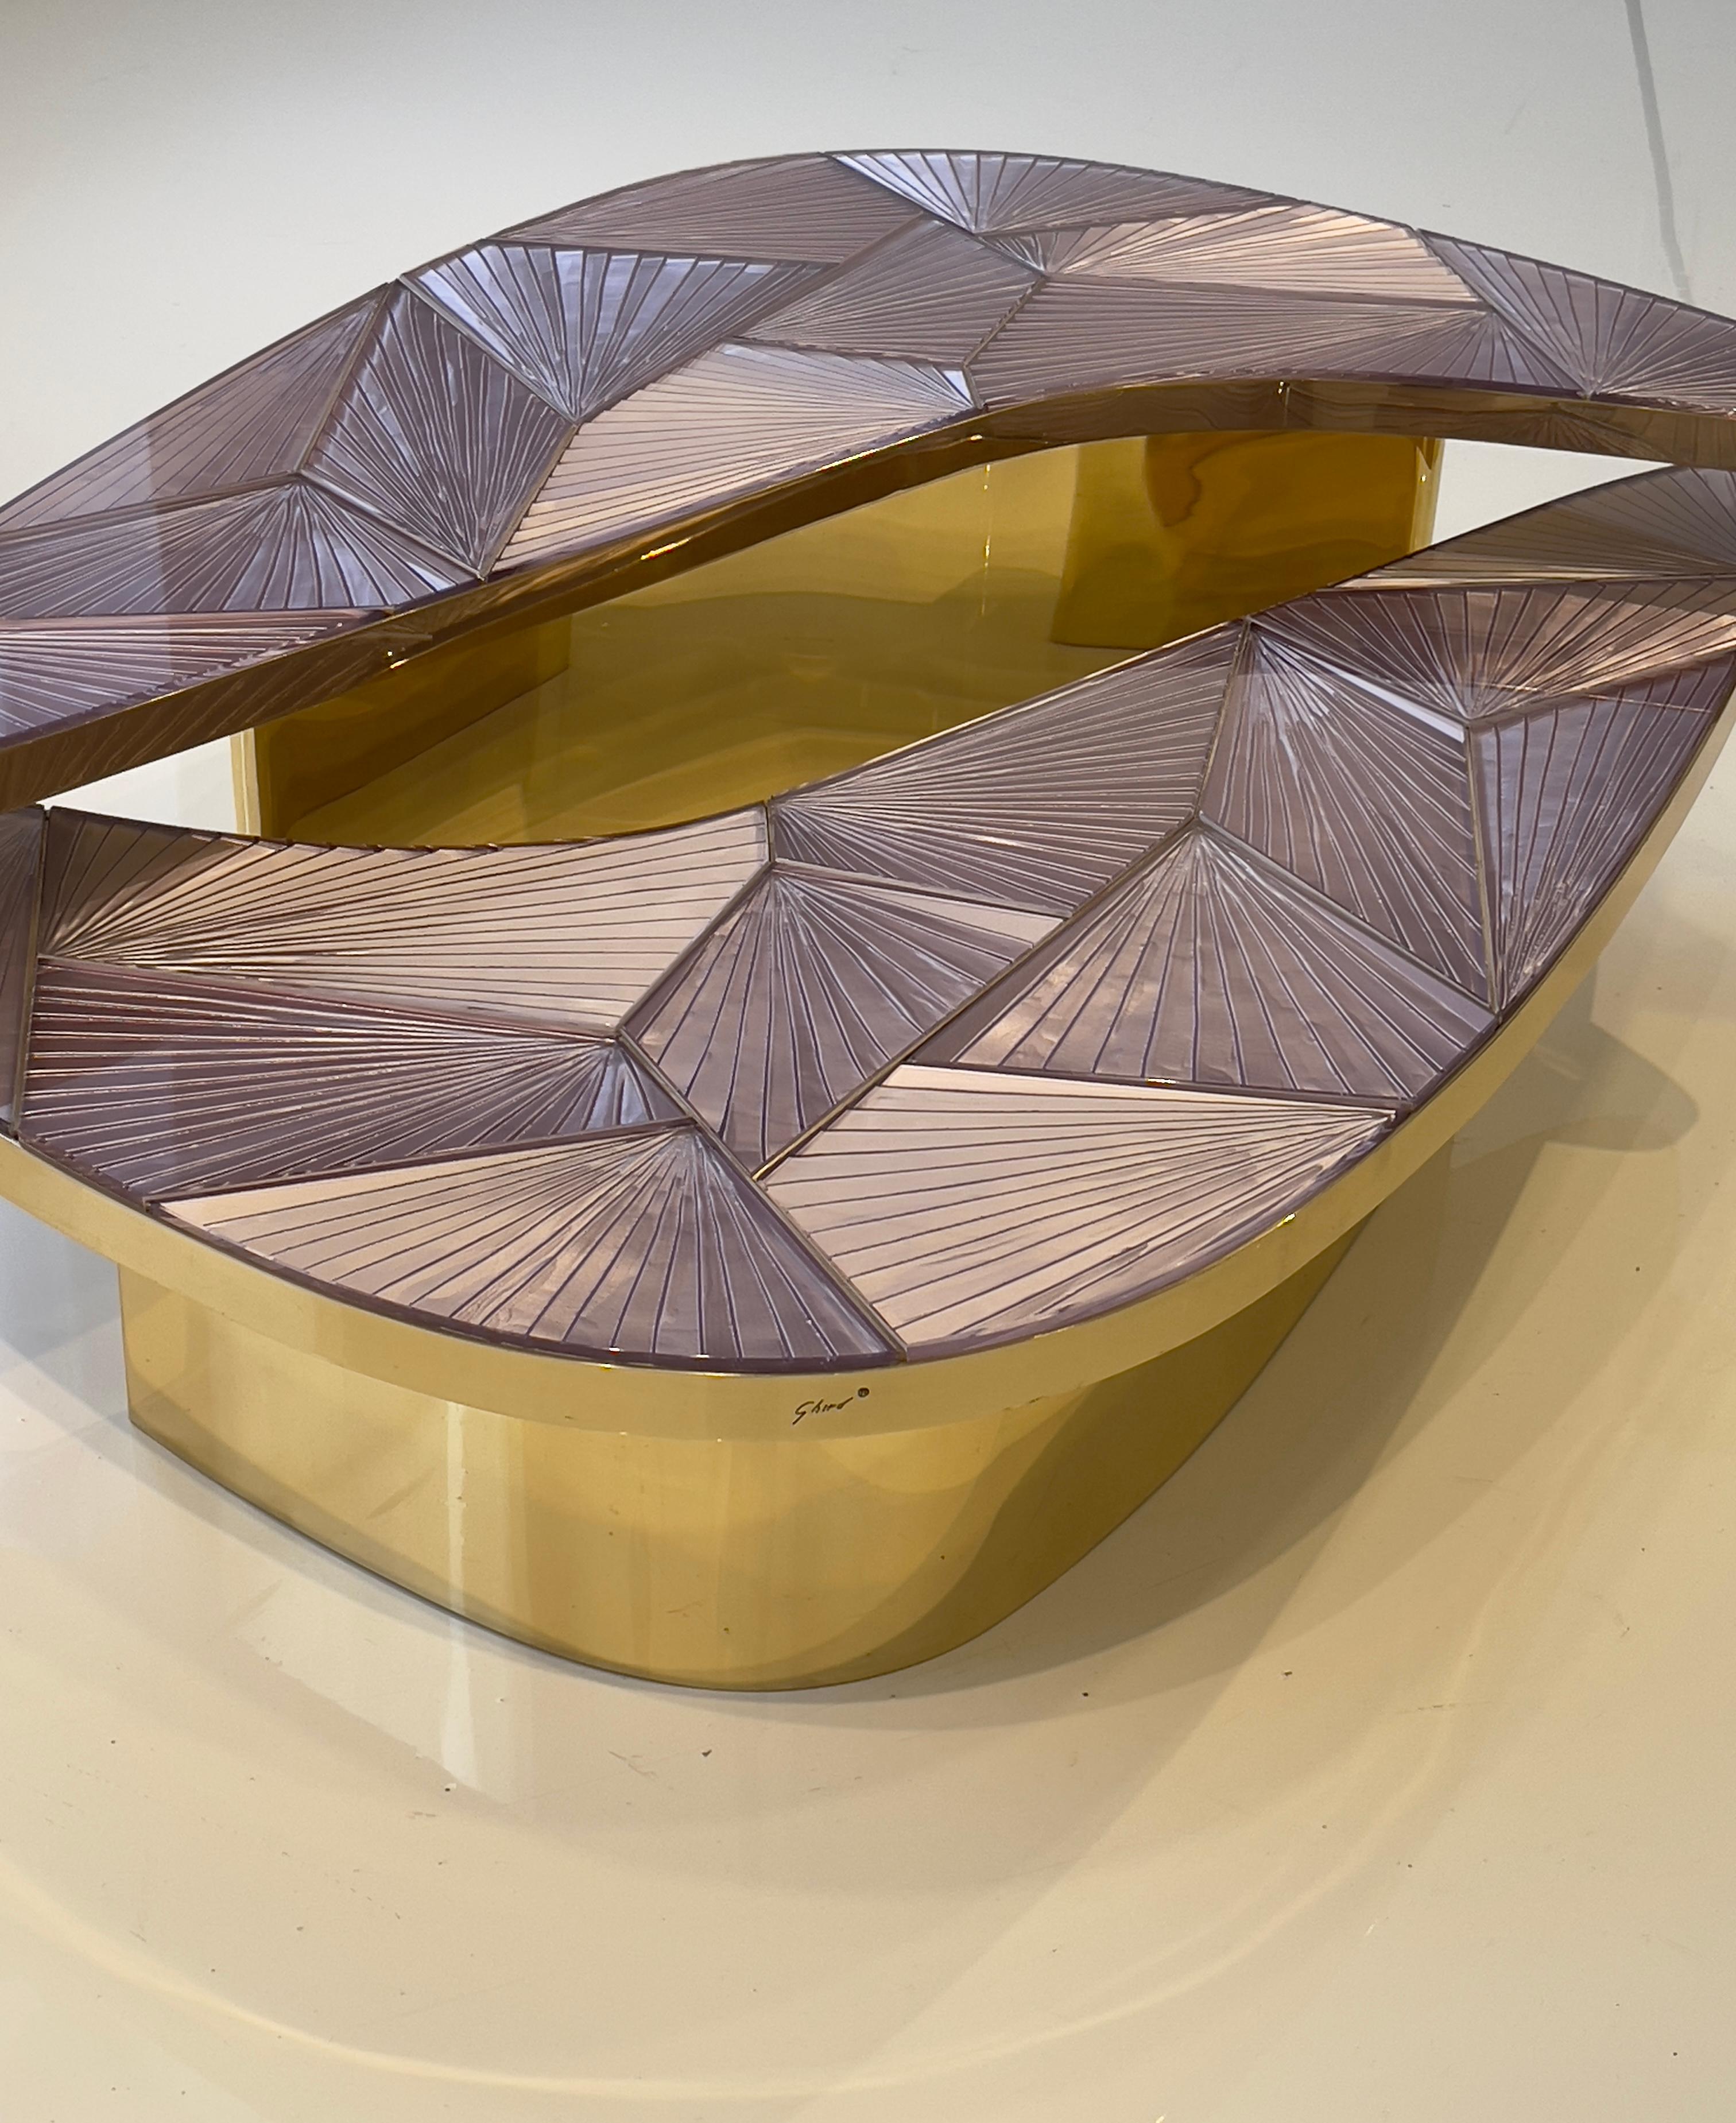 Contemporary 'Amore' Set of two Hand-engraved Pink Glass Coffee Tables by Ghiró Studio For Sale